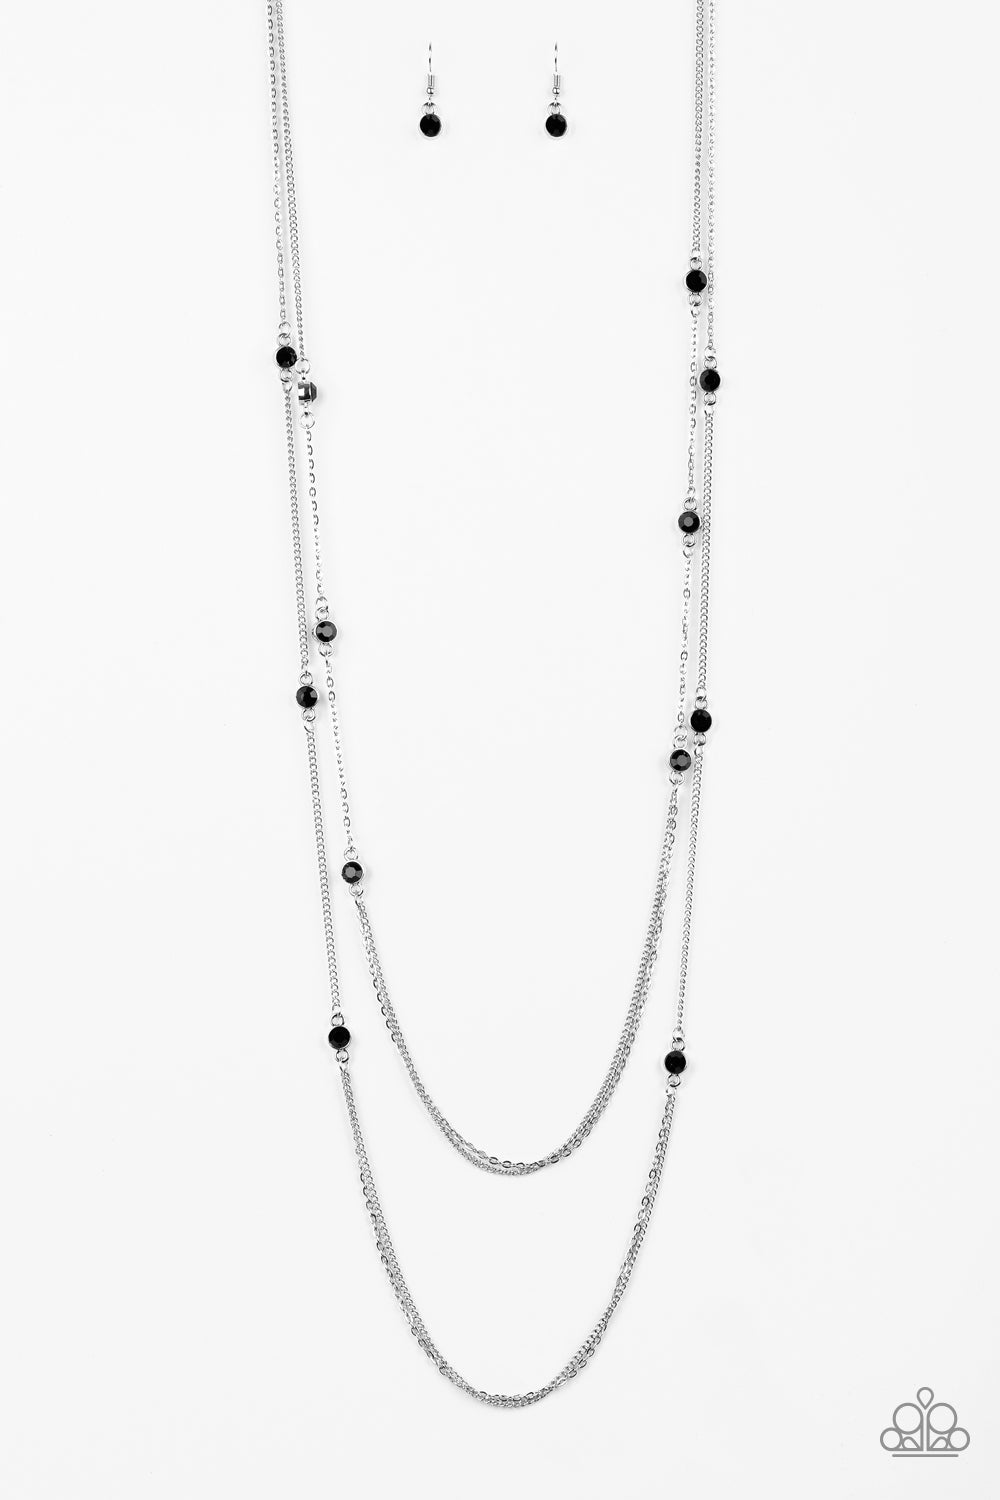 Paparazzi necklace - Sparkle Of The Day - Black